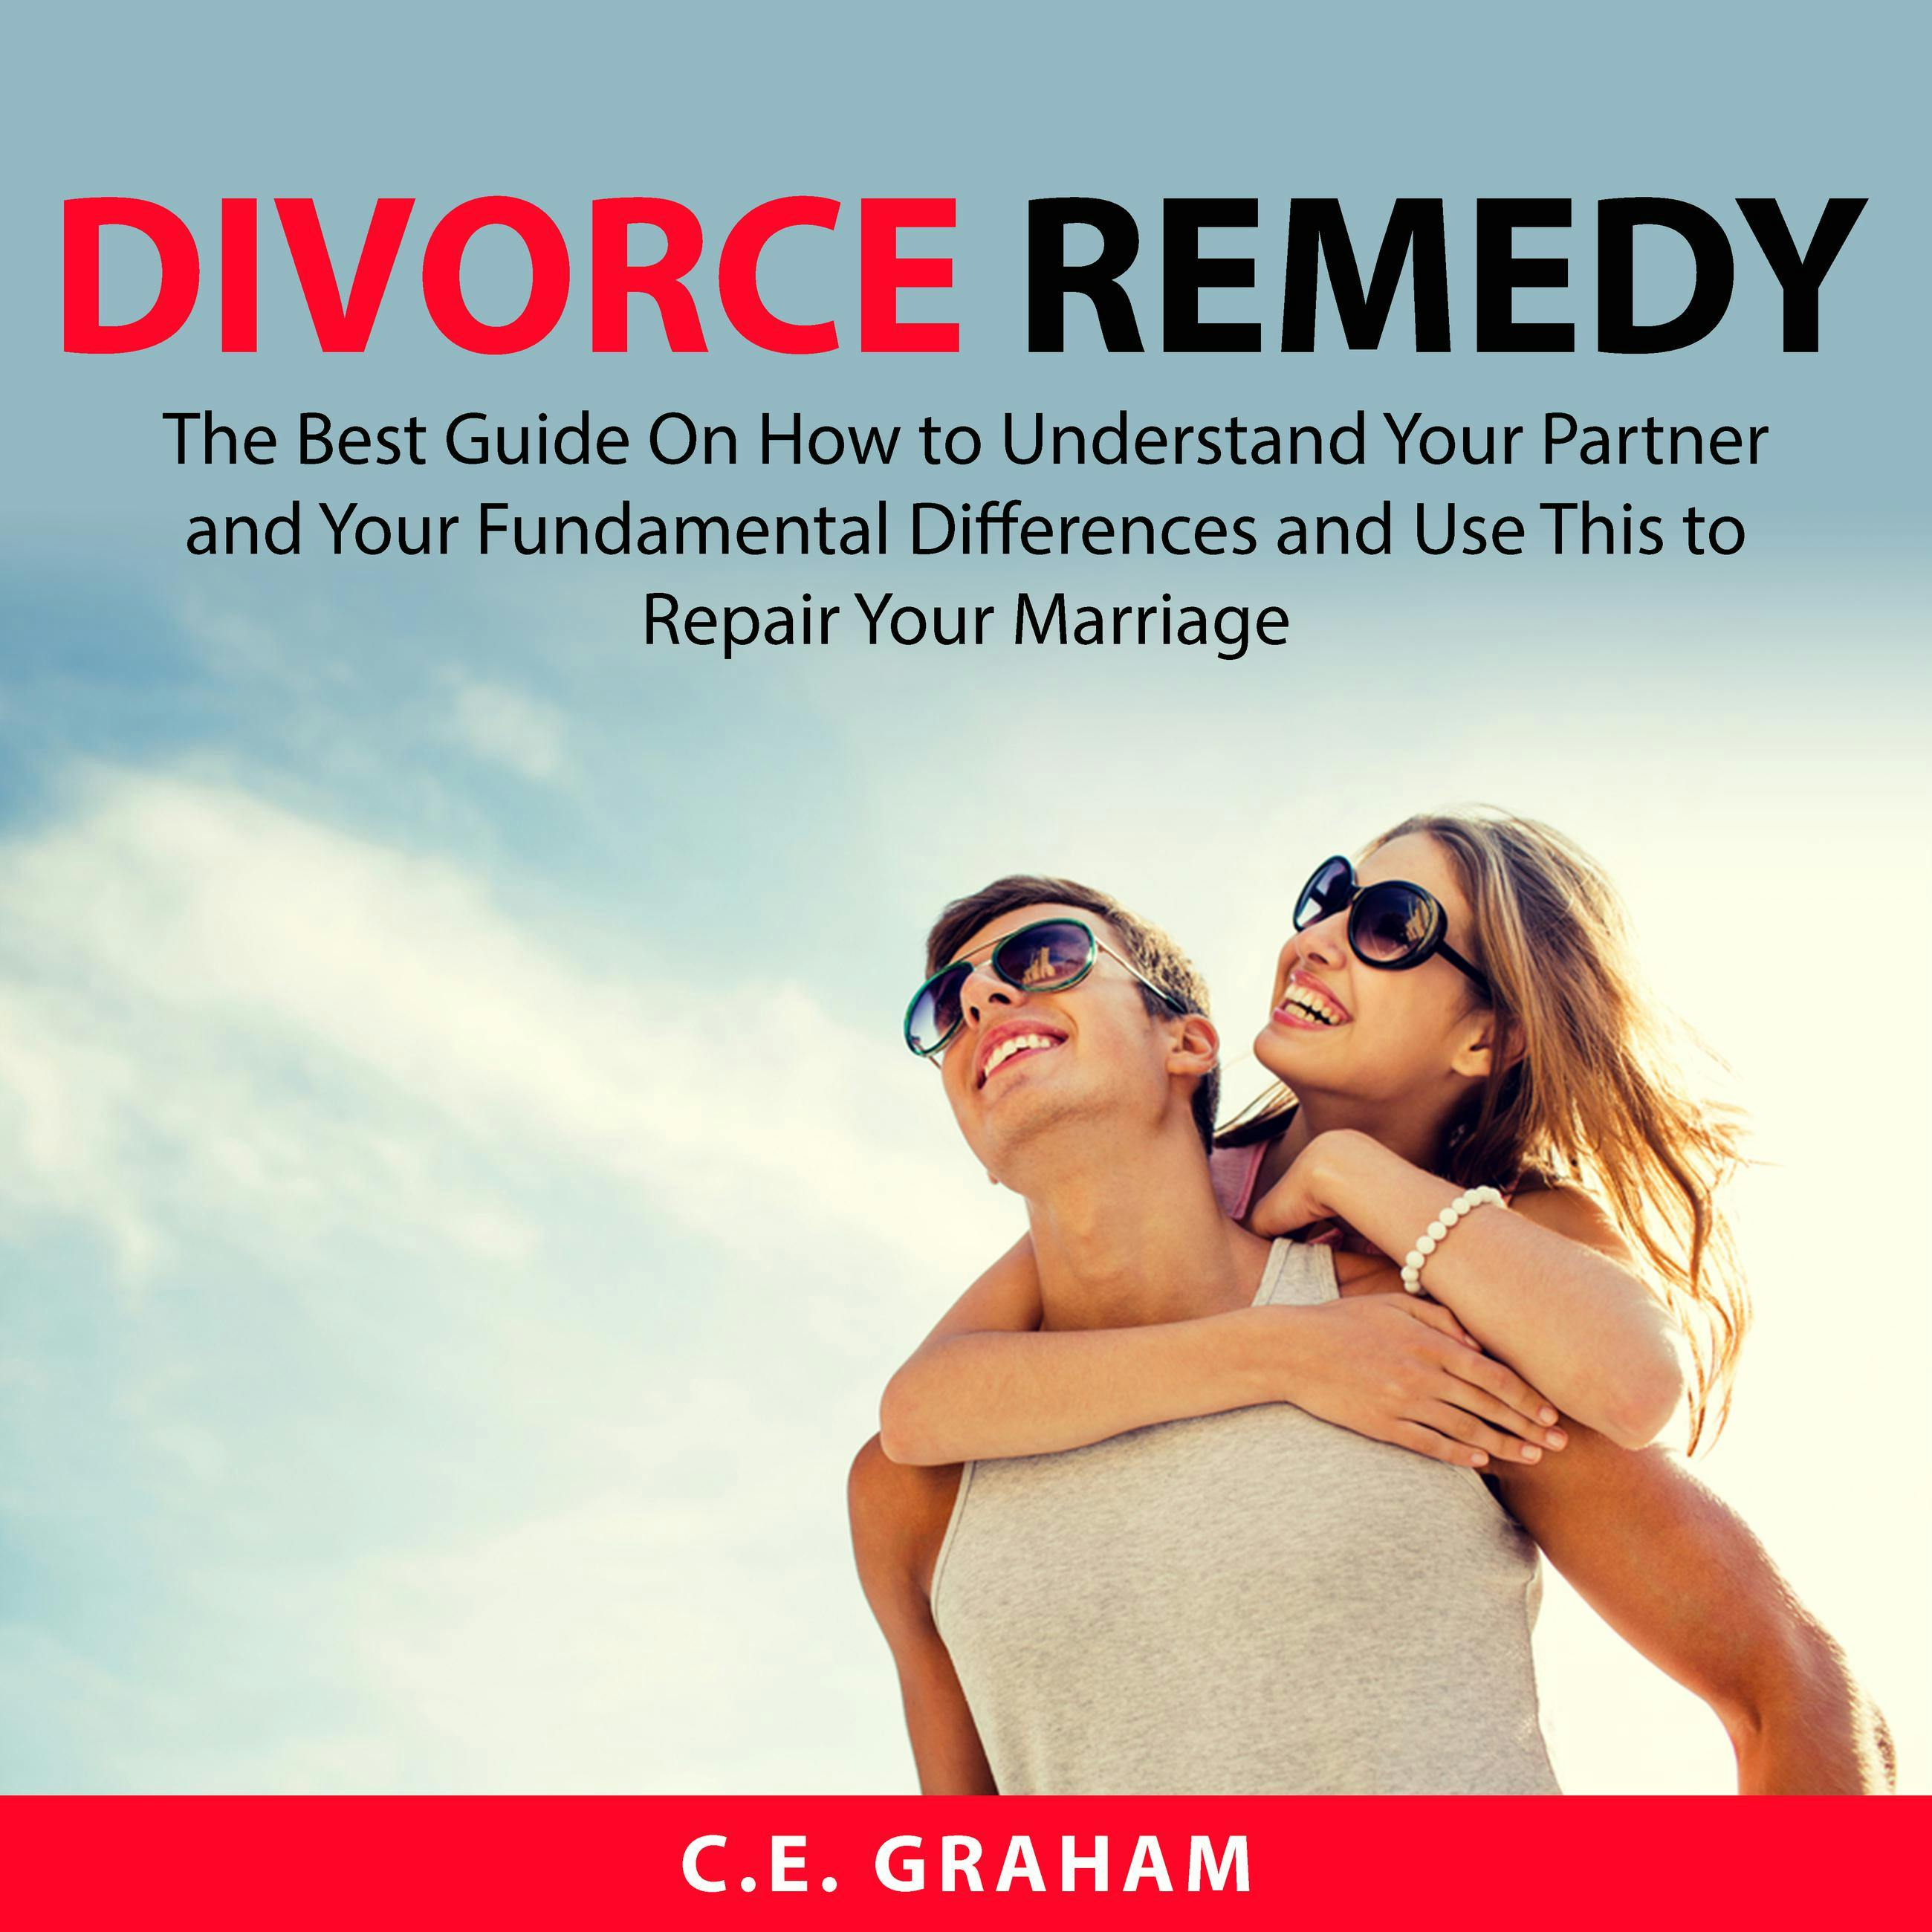 Divorce Remedy: The Best Guide On How to Understand Your Partner and Your Fundamental Differences and Use This to Repair Your Marriage - C.E. Graham